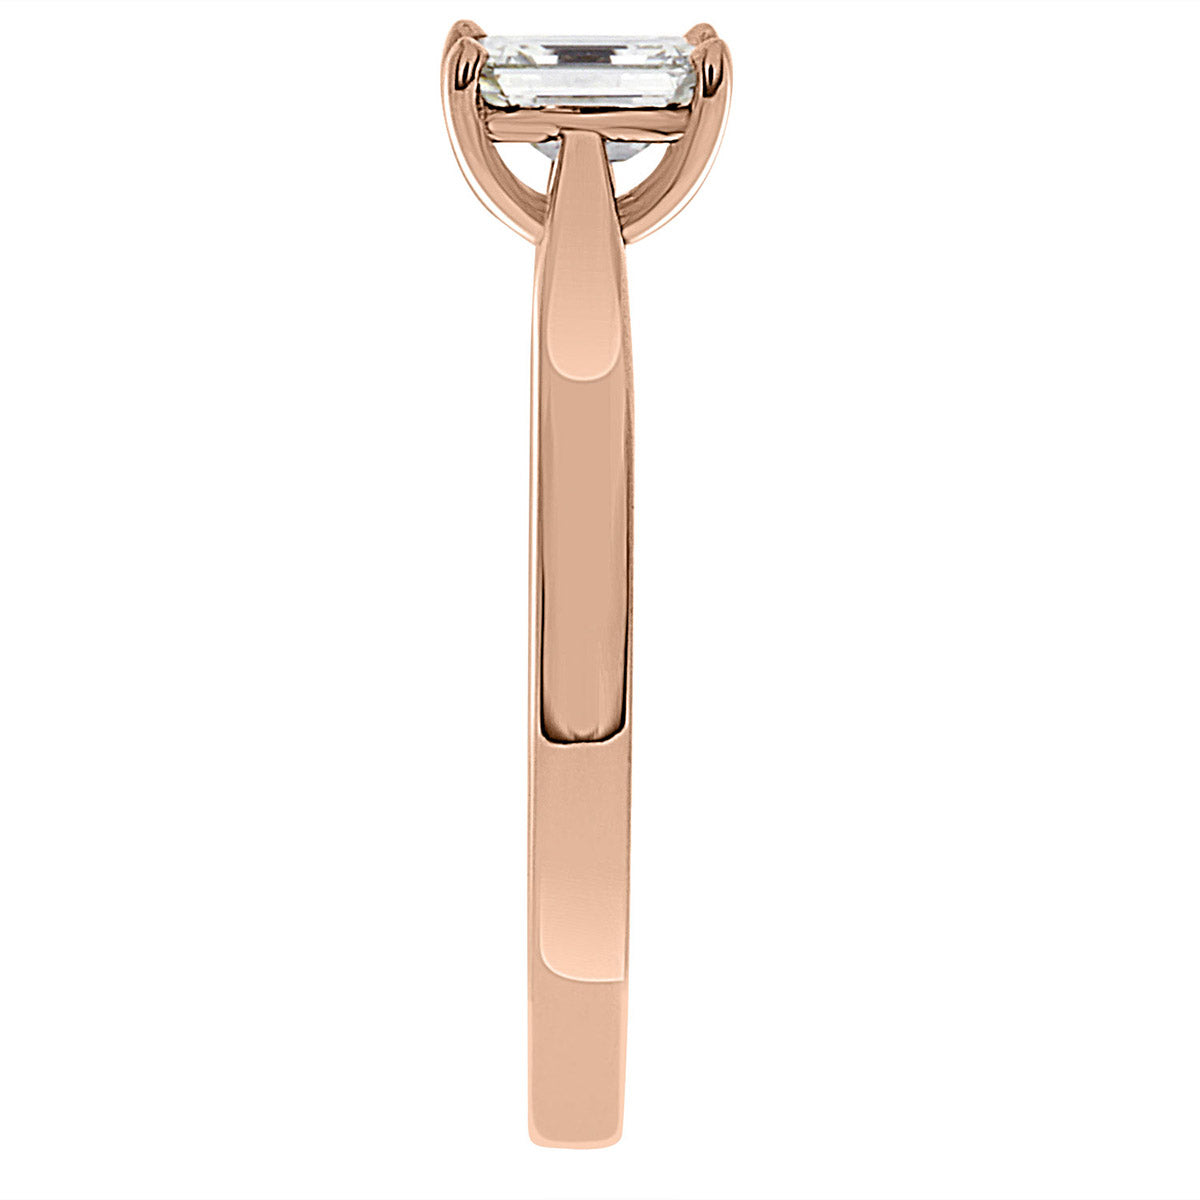 Emerald Cut Ring Solitaire Engagement Ring in rose gold standing upright